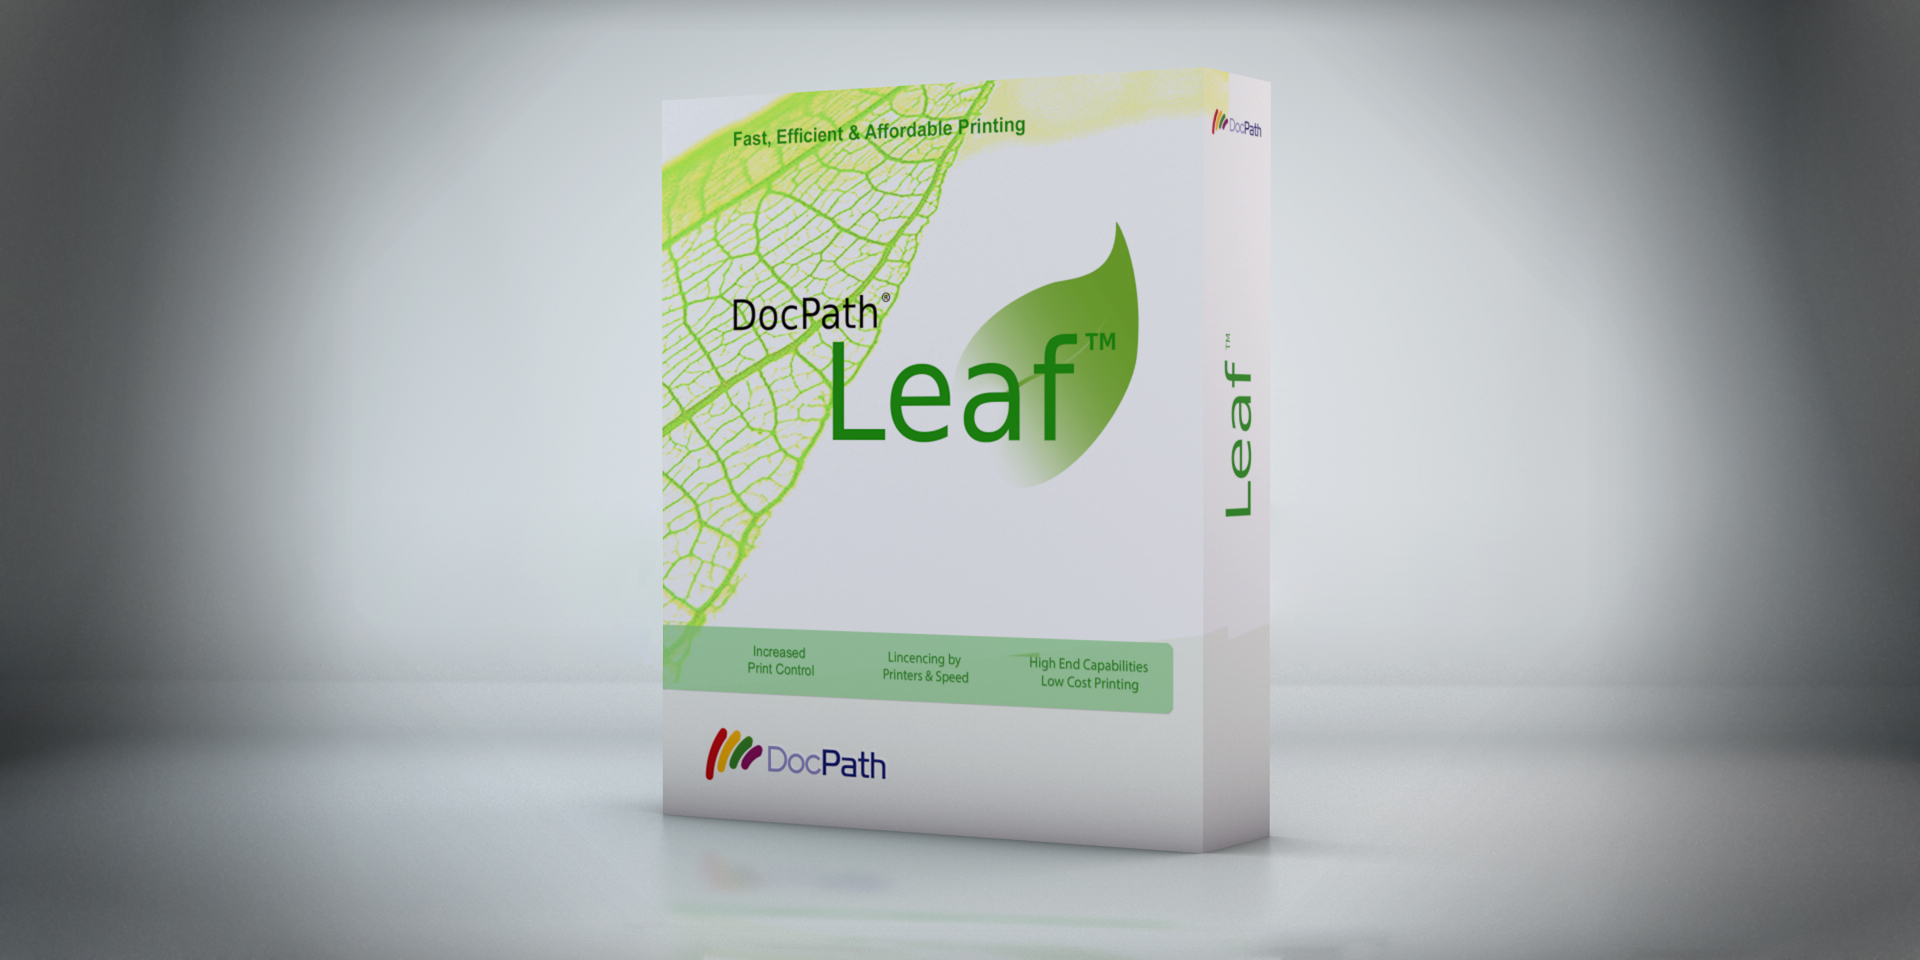 DocPath Launches New Document Software Website